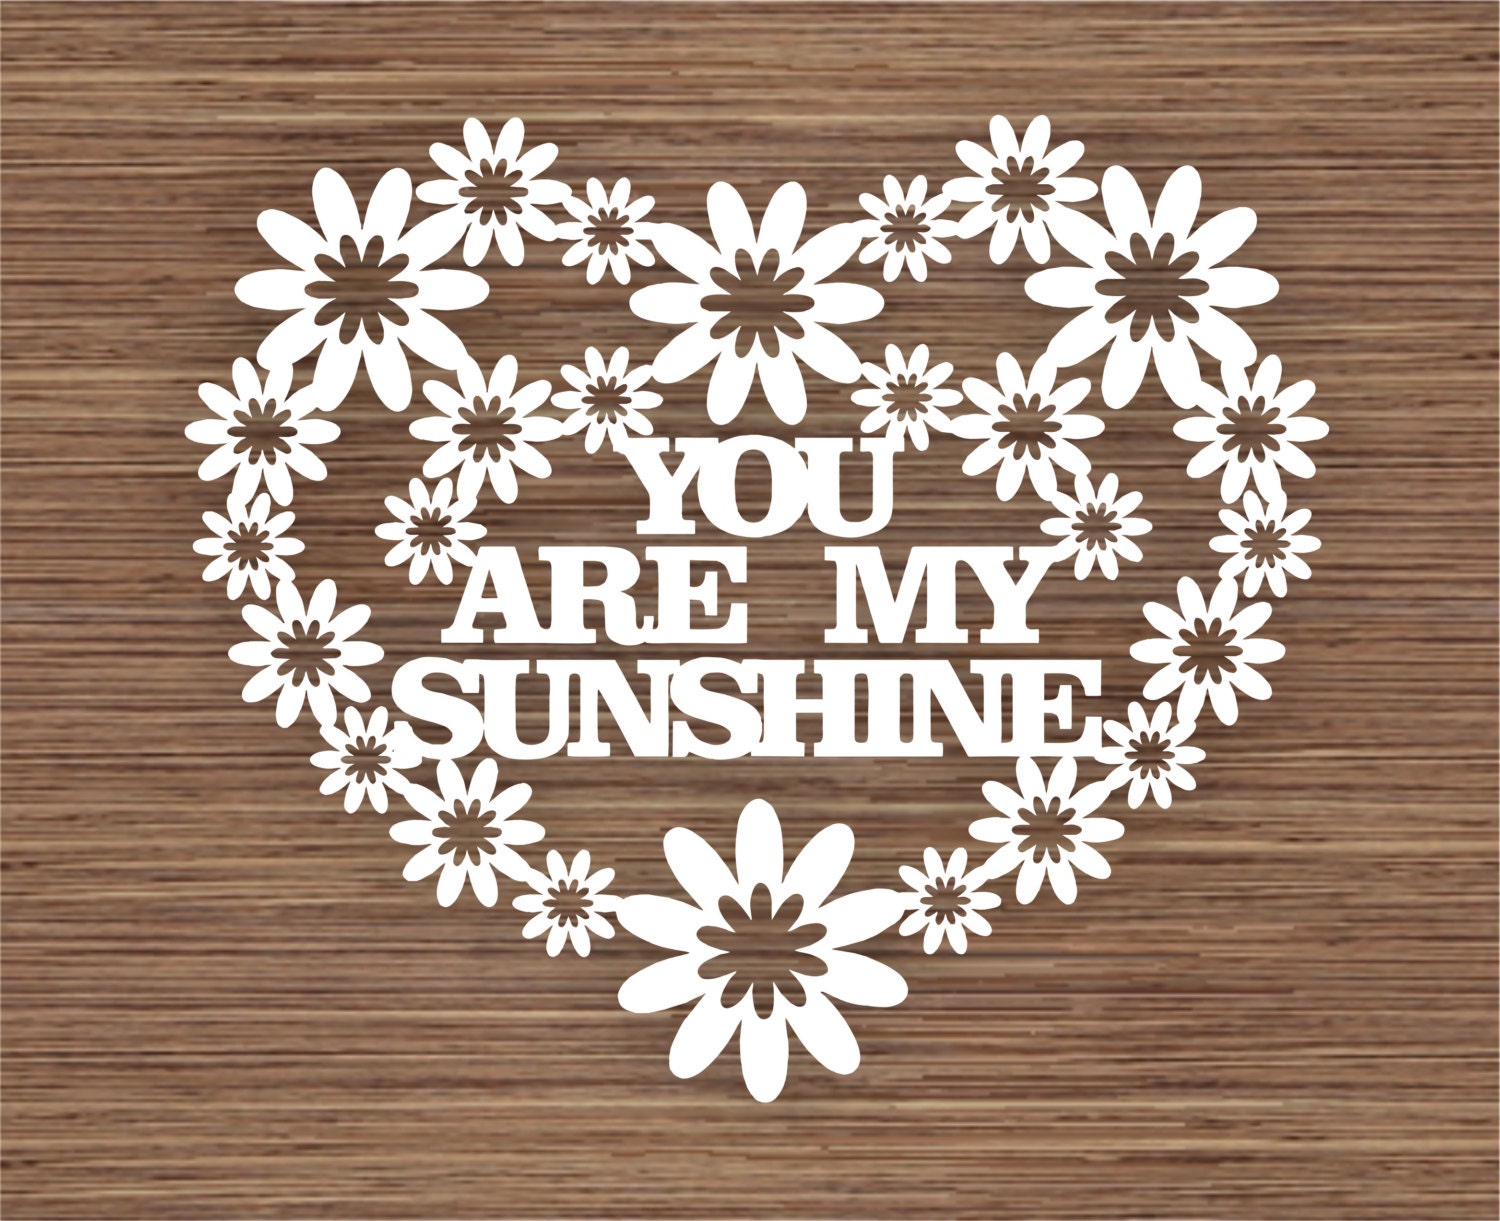 Download You are my sunshine Heart PDF SVG Commercial Use Instant